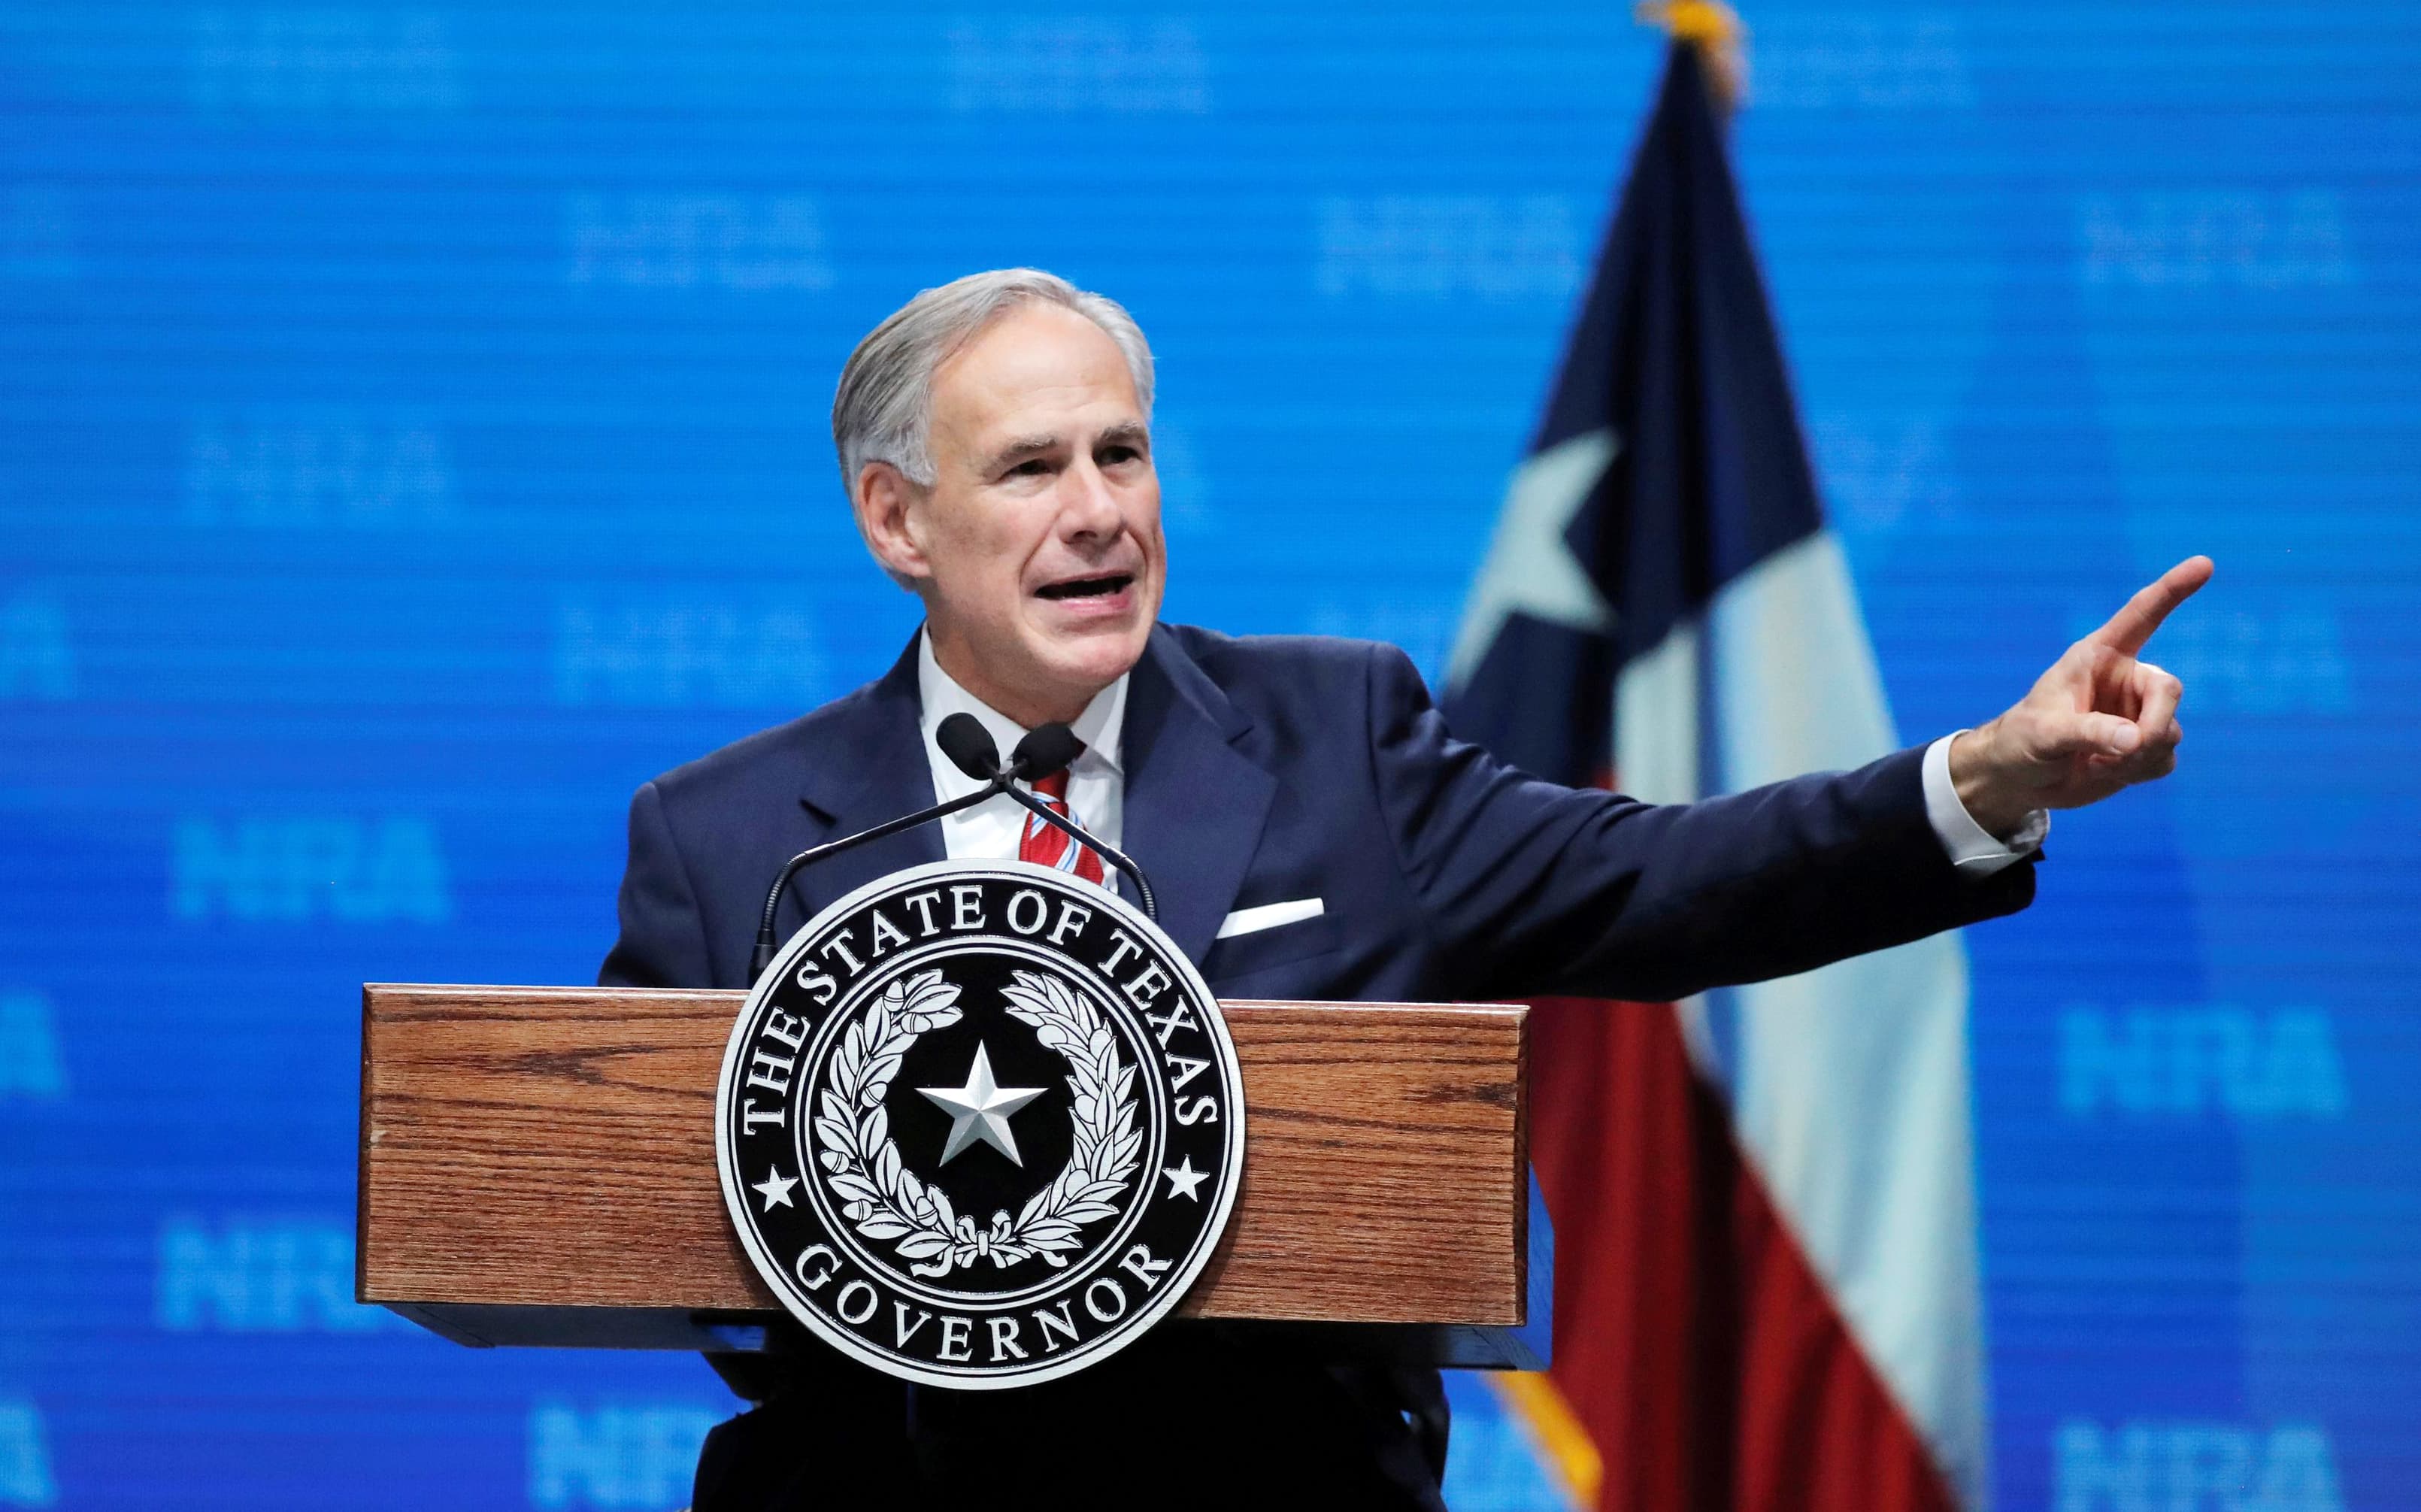 Texas Gov. Abbott, who banned mask mandates, tests positive for Covid